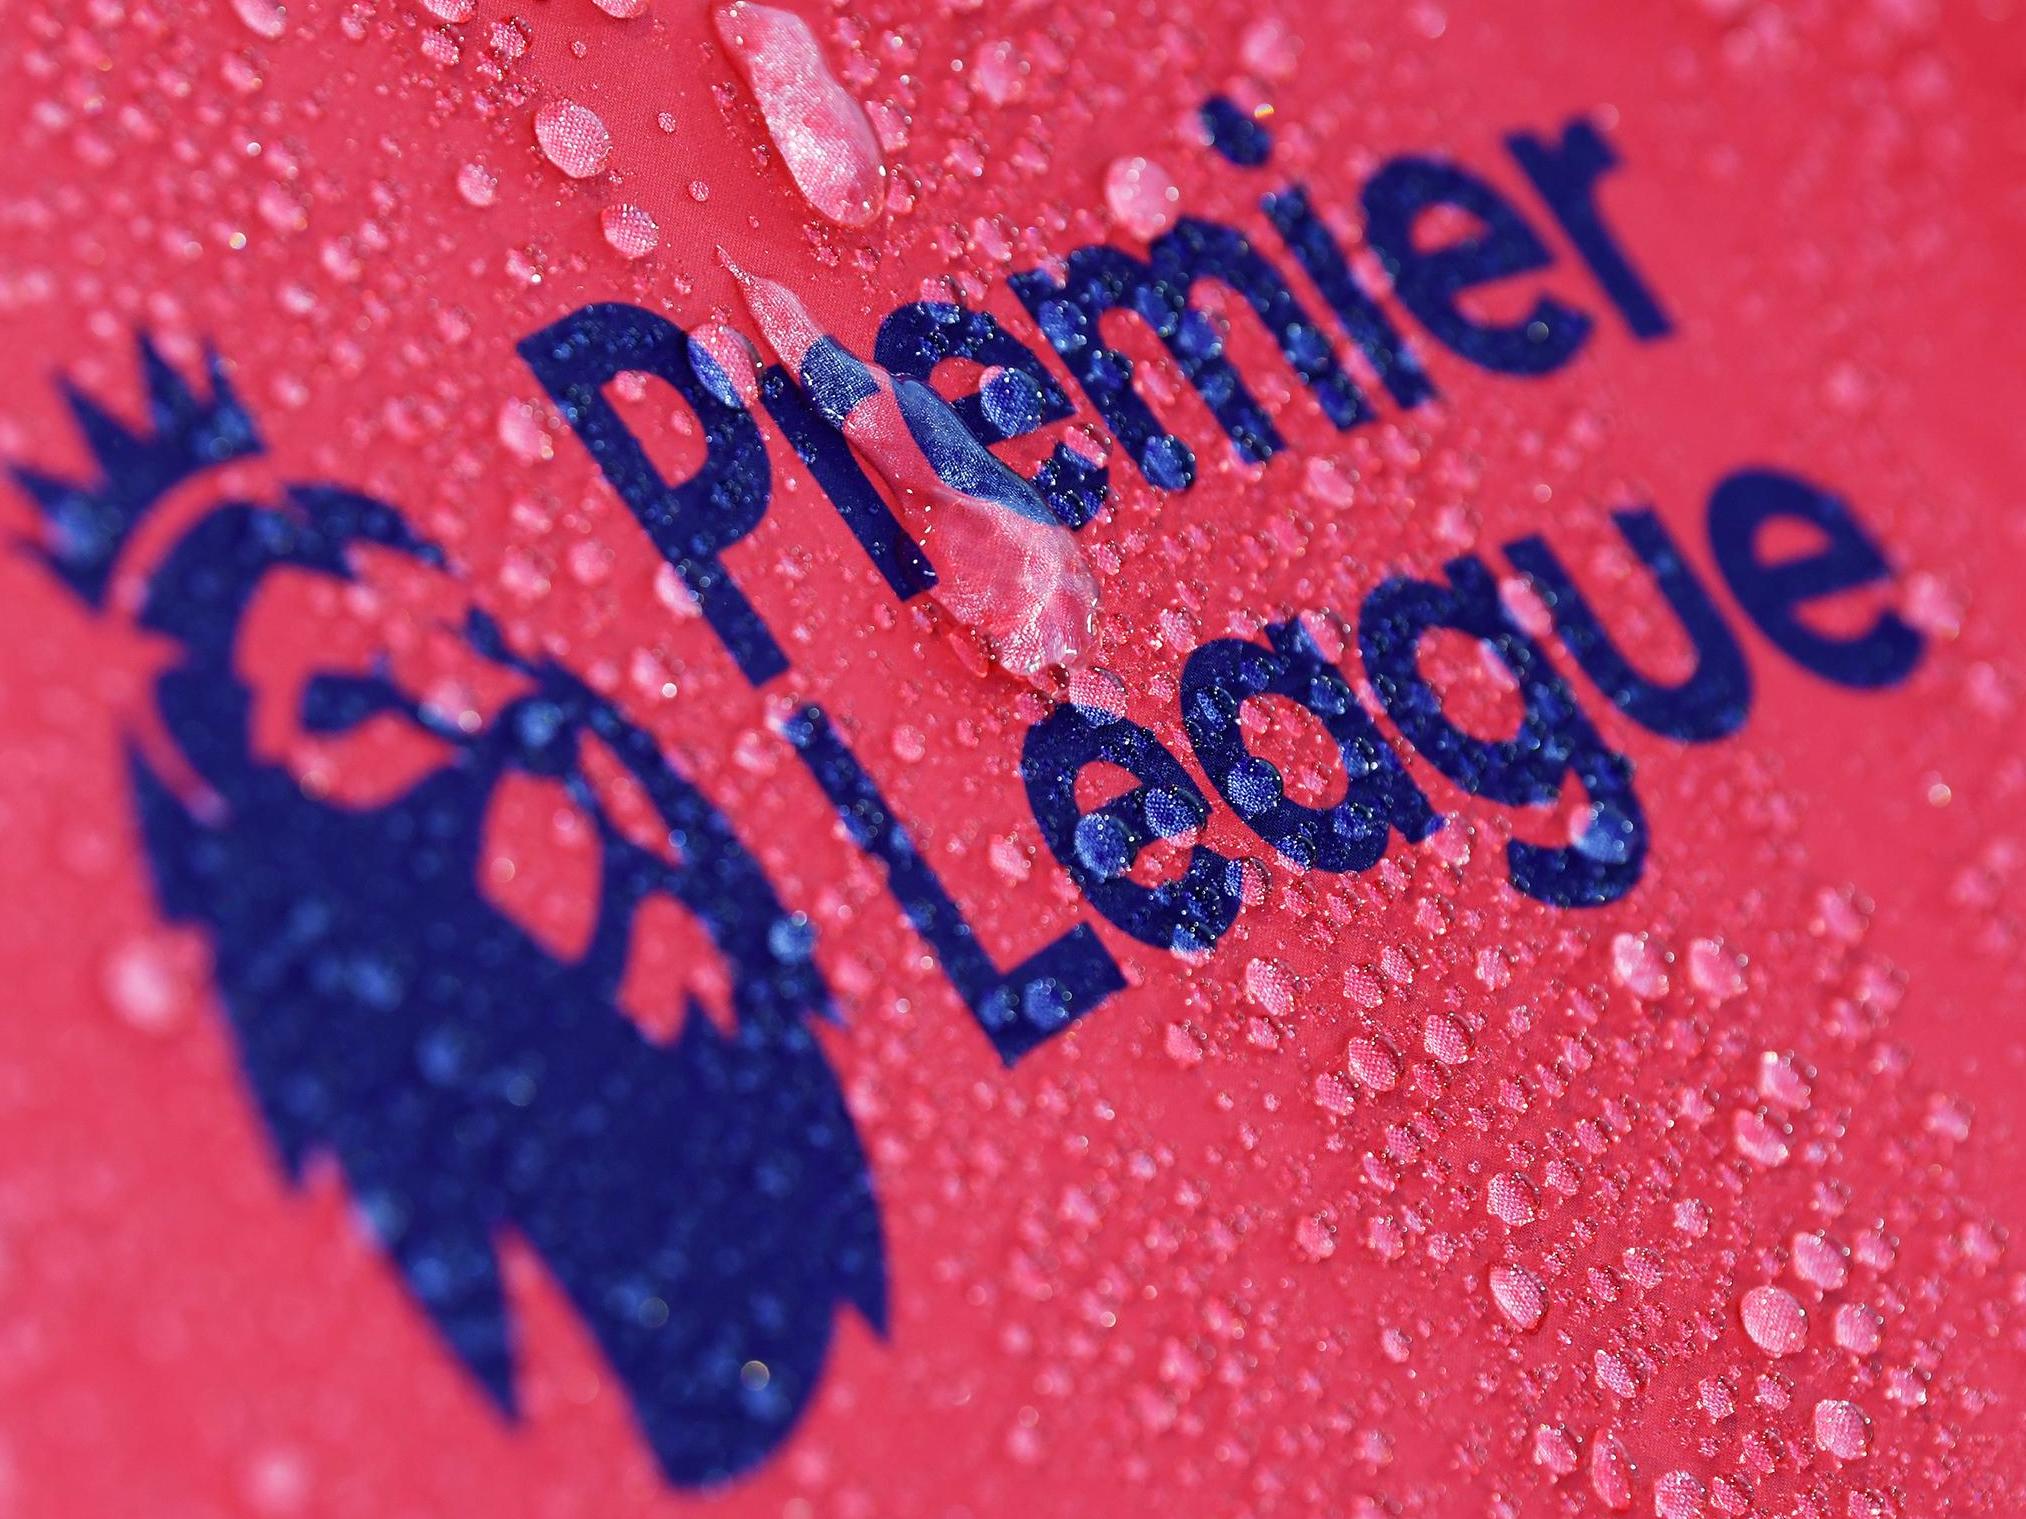 The Premier League has growing markets in Asia and the US